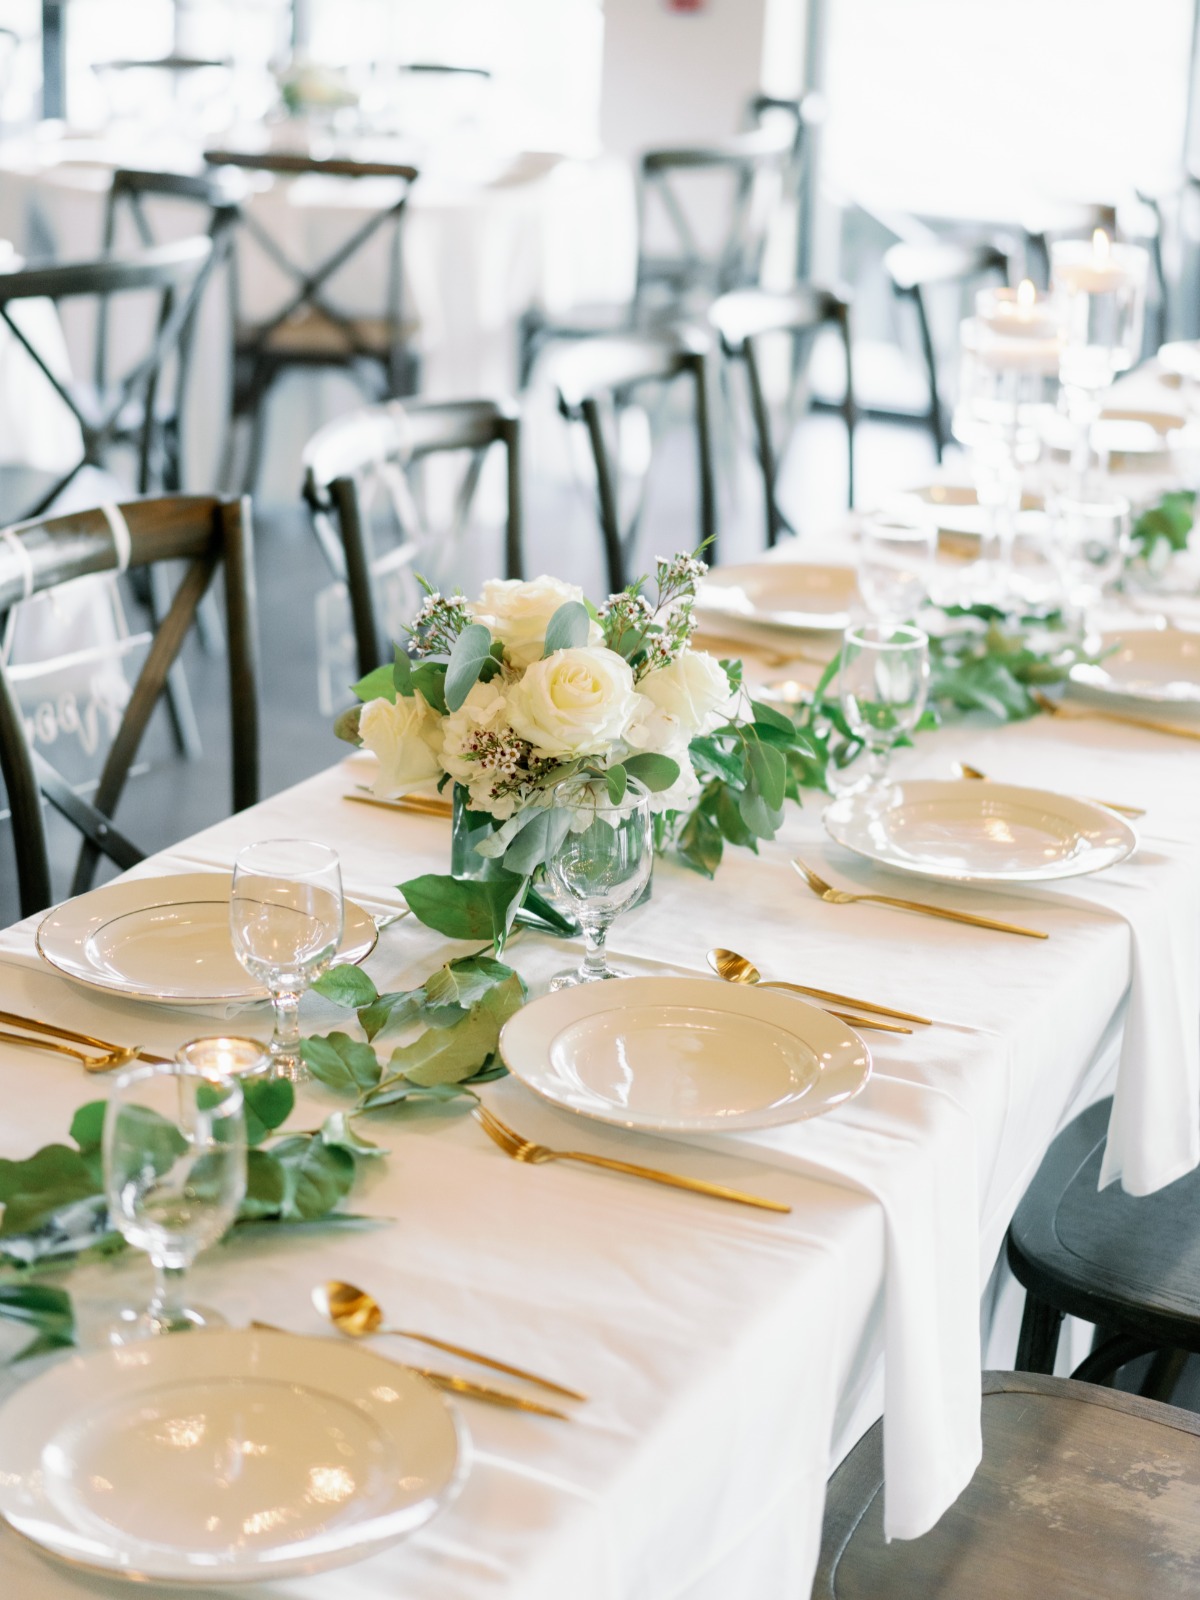 using greenery for a table runner